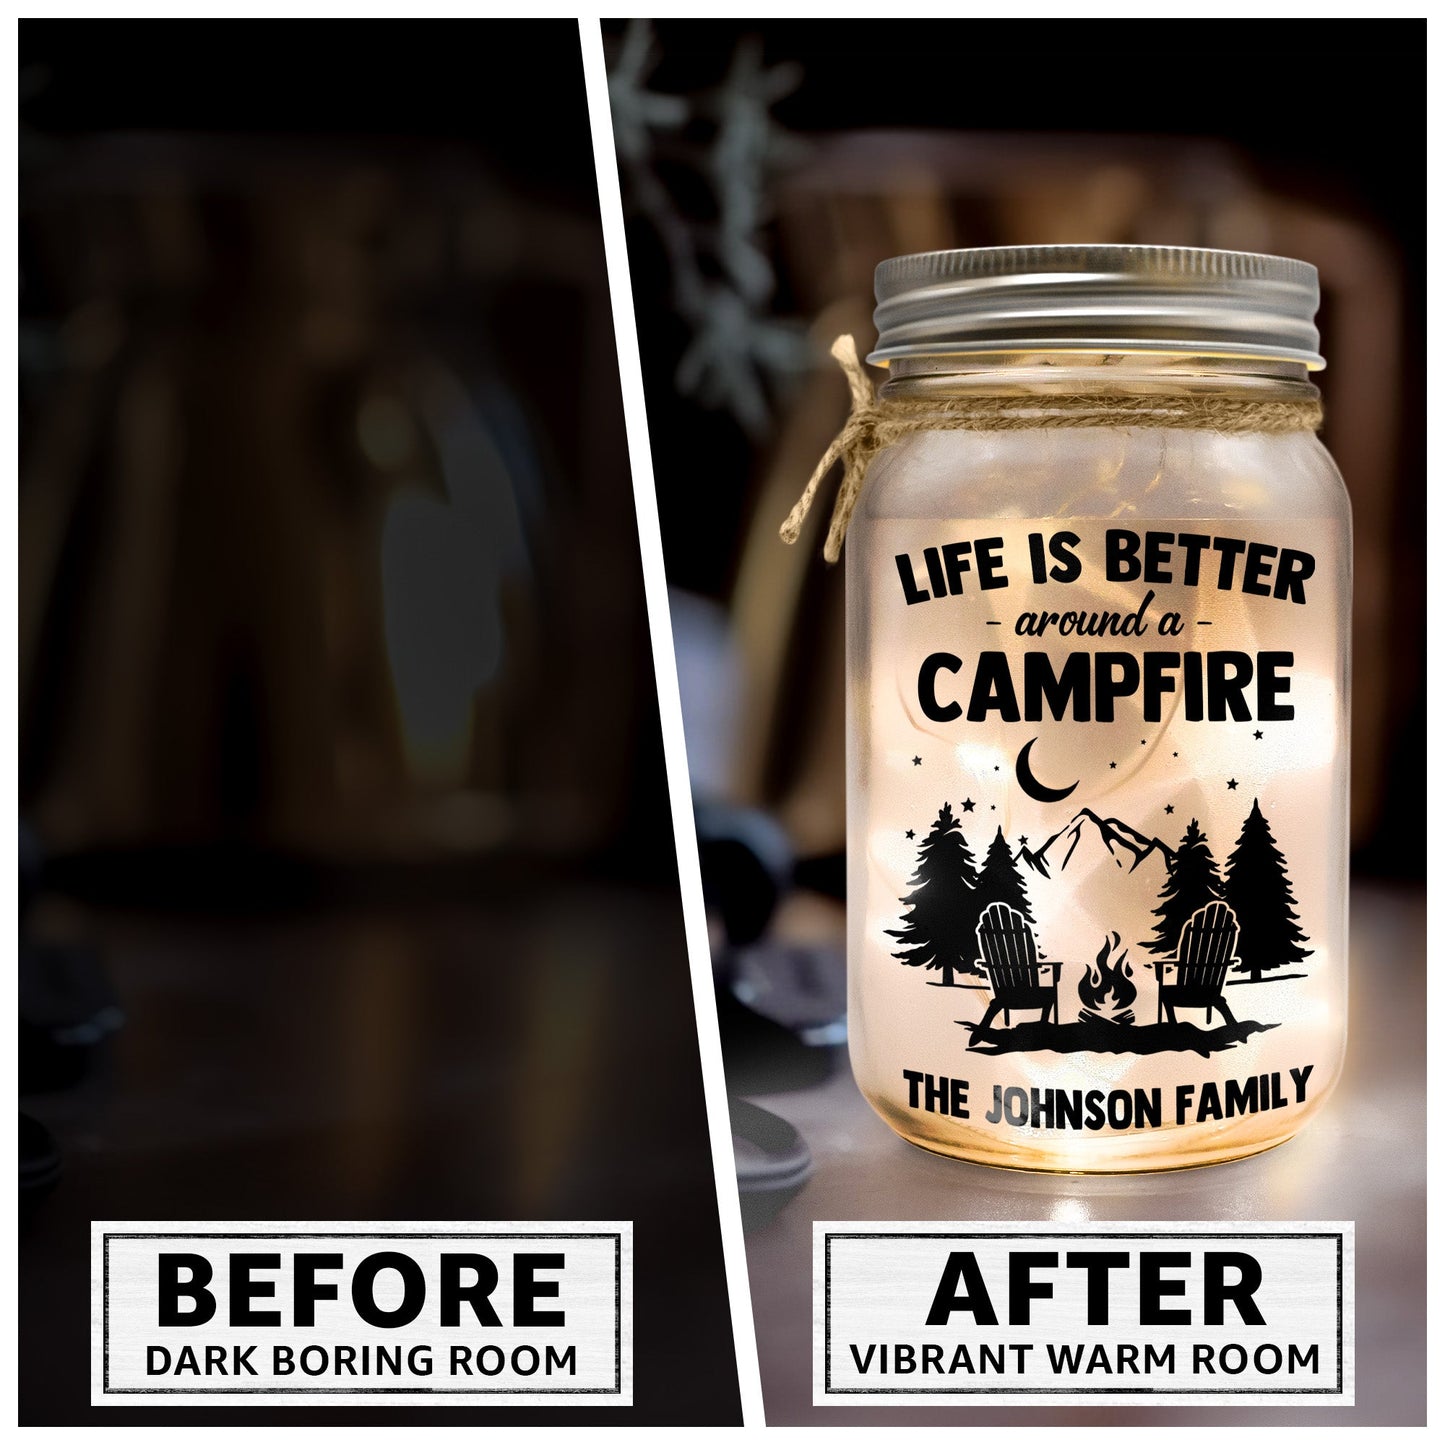 Life Is Better Around A Campfire - Personalized Mason Jar Light